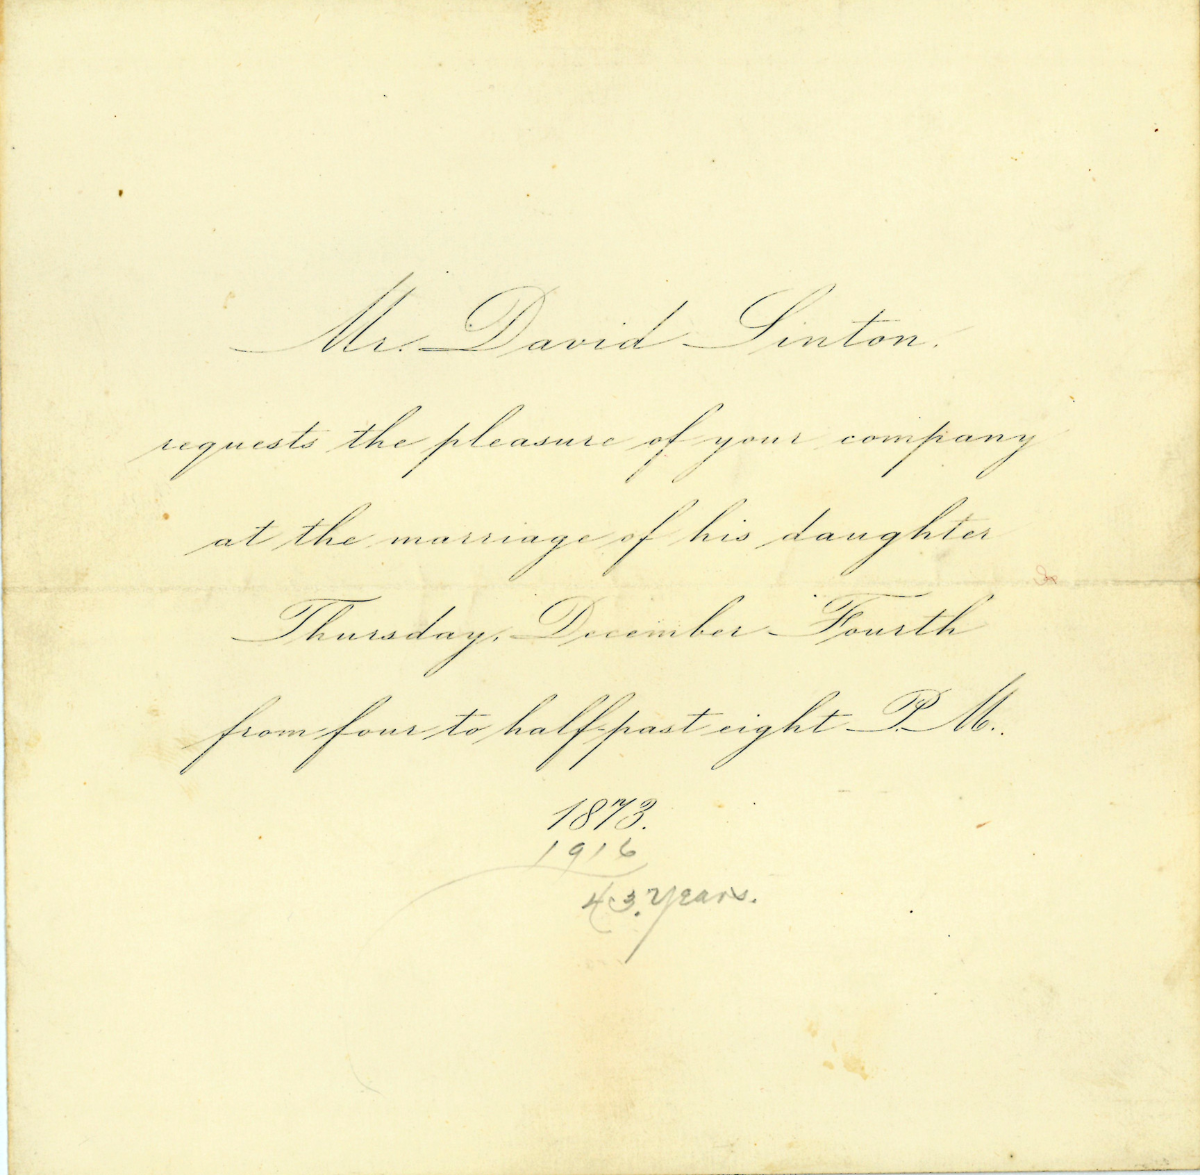 Invitation to the wedding of Charles Phelps Taft and Anna Sinton, December 4, 1873, Taft Museum of Art Archives